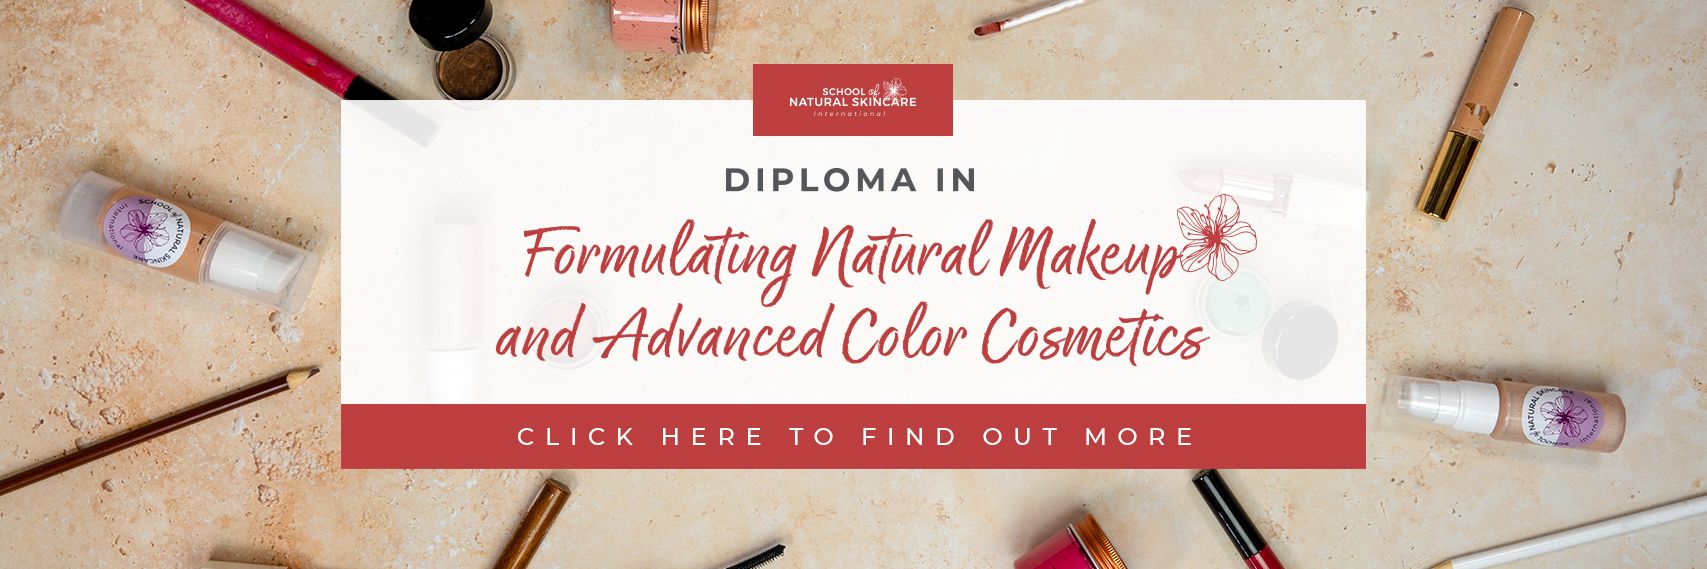 Pigments Used in Natural Color Cosmetics: Mineral vs Botanical Makeup Formulation 